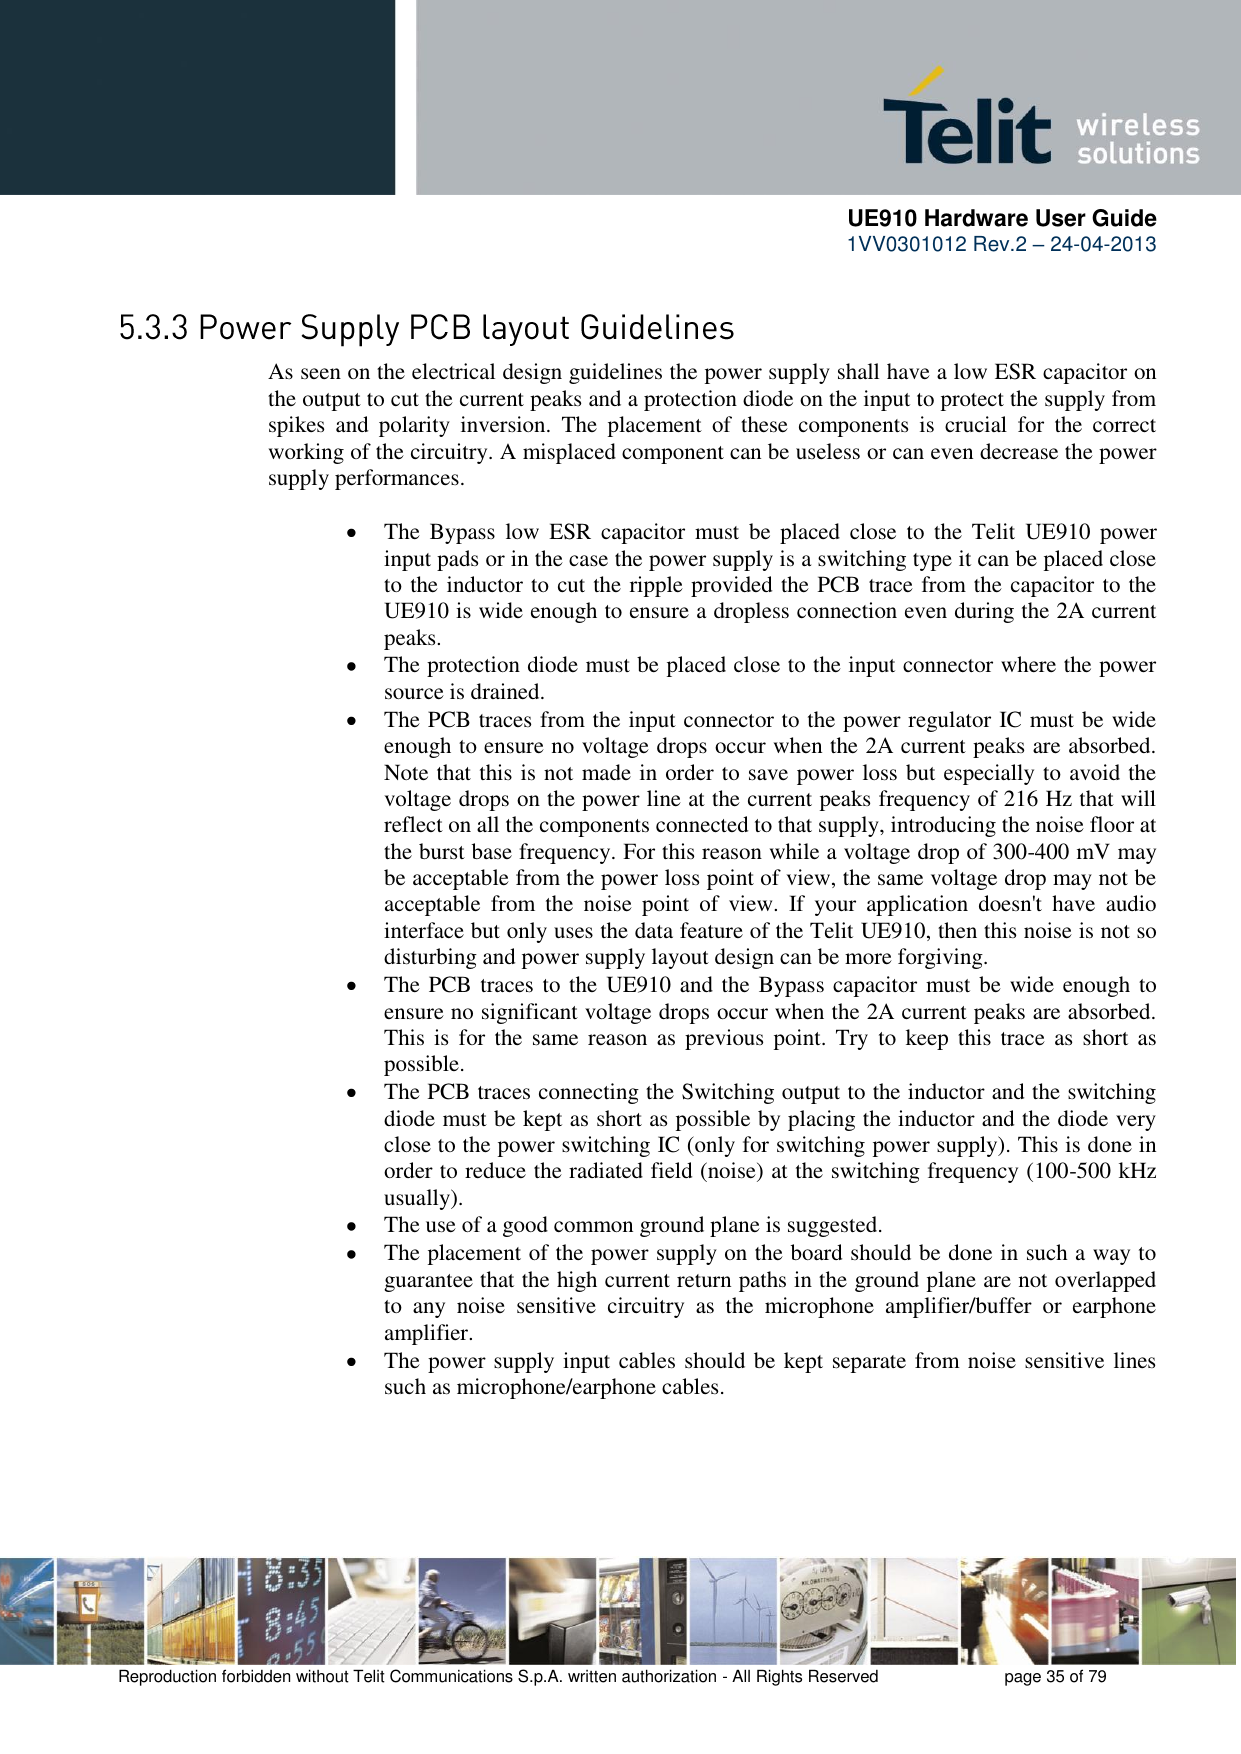      UE910 Hardware User Guide  1VV0301012 Rev.2 – 24-04-2013    Reproduction forbidden without Telit Communications S.p.A. written authorization - All Rights Reserved    page 35 of 79   As seen on the electrical design guidelines the power supply shall have a low ESR capacitor on the output to cut the current peaks and a protection diode on the input to protect the supply from spikes  and  polarity  inversion.  The  placement  of  these  components  is  crucial  for  the  correct working of the circuitry. A misplaced component can be useless or can even decrease the power supply performances.   The  Bypass  low  ESR  capacitor  must  be  placed  close  to  the  Telit  UE910  power input pads or in the case the power supply is a switching type it can be placed close to the inductor to cut the ripple provided the PCB trace from the capacitor to the UE910 is wide enough to ensure a dropless connection even during the 2A current peaks.  The protection diode must be placed close to the input connector where the power source is drained.  The PCB traces from the input connector to the power regulator IC must be wide enough to ensure no voltage drops occur when the 2A current peaks are absorbed. Note that this is not made in order to save power loss but especially to avoid the voltage drops on the power line at the current peaks frequency of 216 Hz that will reflect on all the components connected to that supply, introducing the noise floor at the burst base frequency. For this reason while a voltage drop of 300-400 mV may be acceptable from the power loss point of view, the same voltage drop may not be acceptable  from  the  noise  point  of  view.  If  your  application  doesn&apos;t  have  audio interface but only uses the data feature of the Telit UE910, then this noise is not so disturbing and power supply layout design can be more forgiving.  The PCB traces to the UE910 and the Bypass capacitor must be wide enough to ensure no significant voltage drops occur when the 2A current peaks are absorbed. This  is for  the same reason as previous point.  Try  to keep  this trace  as short  as possible.  The PCB traces connecting the Switching output to the inductor and the switching diode must be kept as short as possible by placing the inductor and the diode very close to the power switching IC (only for switching power supply). This is done in order to reduce the radiated field (noise) at the switching frequency (100-500 kHz usually).  The use of a good common ground plane is suggested.  The placement of the power supply on the board should be done in such a way to guarantee that the high current return paths in the ground plane are not overlapped to  any  noise  sensitive  circuitry  as  the  microphone  amplifier/buffer  or  earphone amplifier.  The power supply input cables should be kept separate from noise sensitive lines such as microphone/earphone cables.  